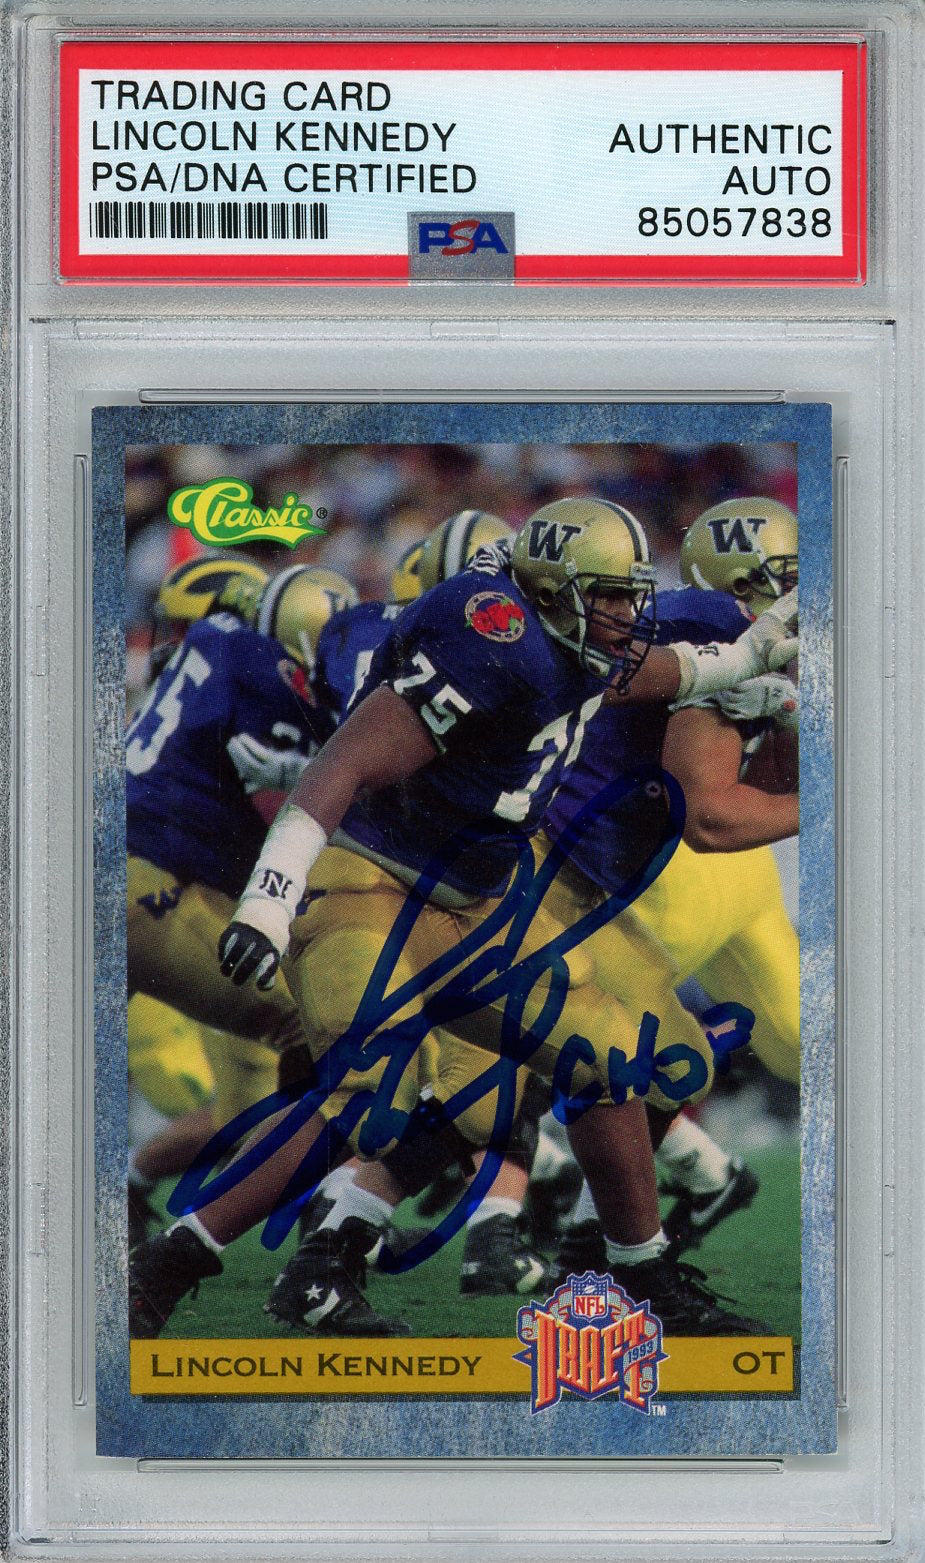 1993 CLASSIC NFL DRAFT LINCOLN KENNEDY RC #9 AUTO SIGNED PSA/DNA